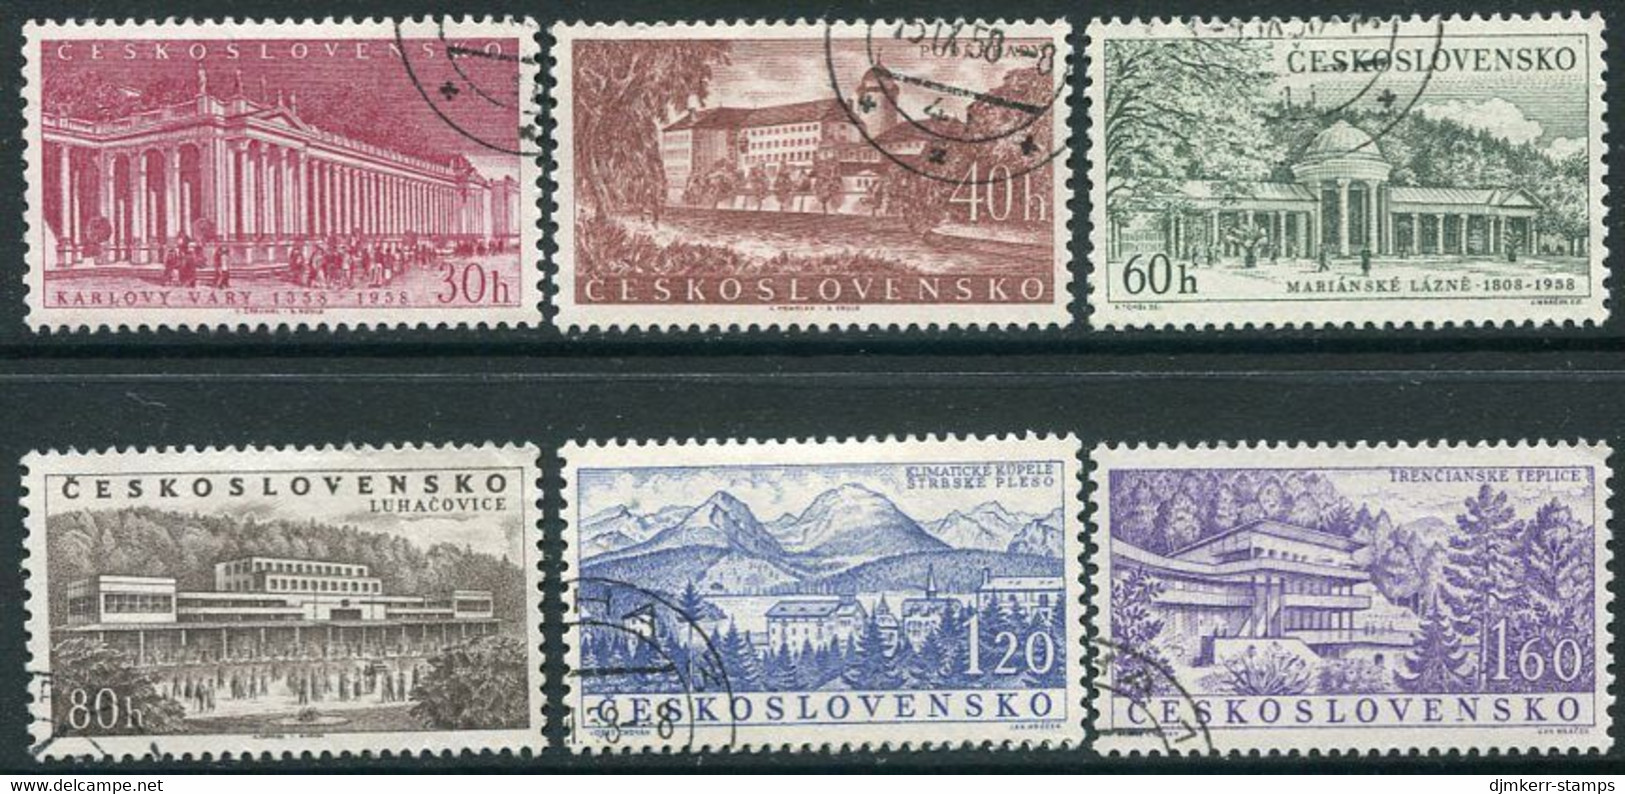 CZECHOSLOVAKIA 1958 Spas Used   Michel 1085-90 - Used Stamps